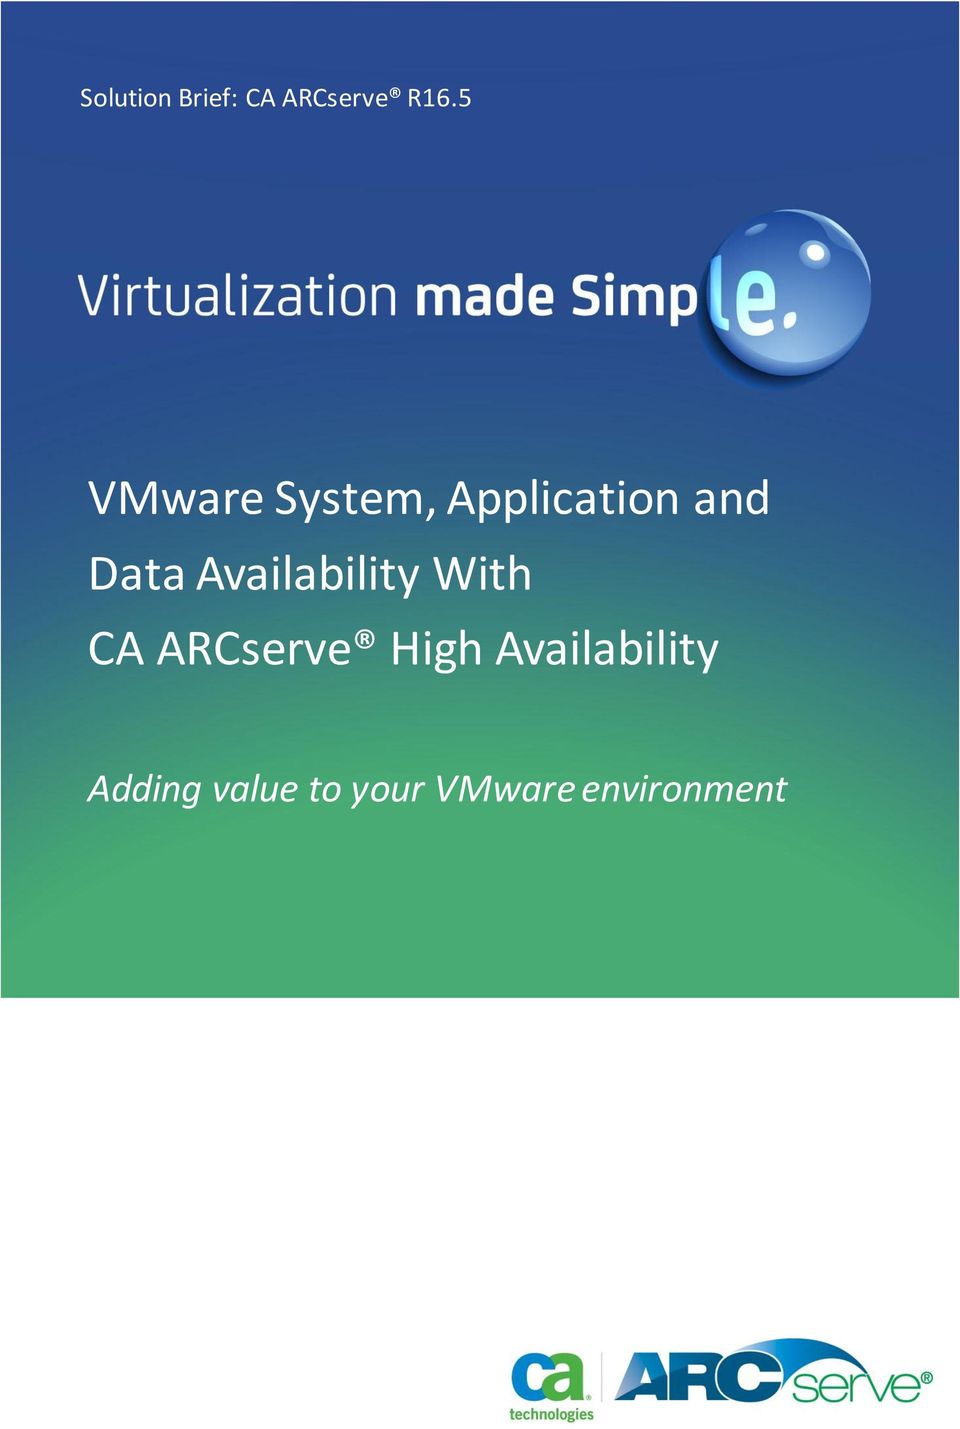 Application and Data Availability With CA